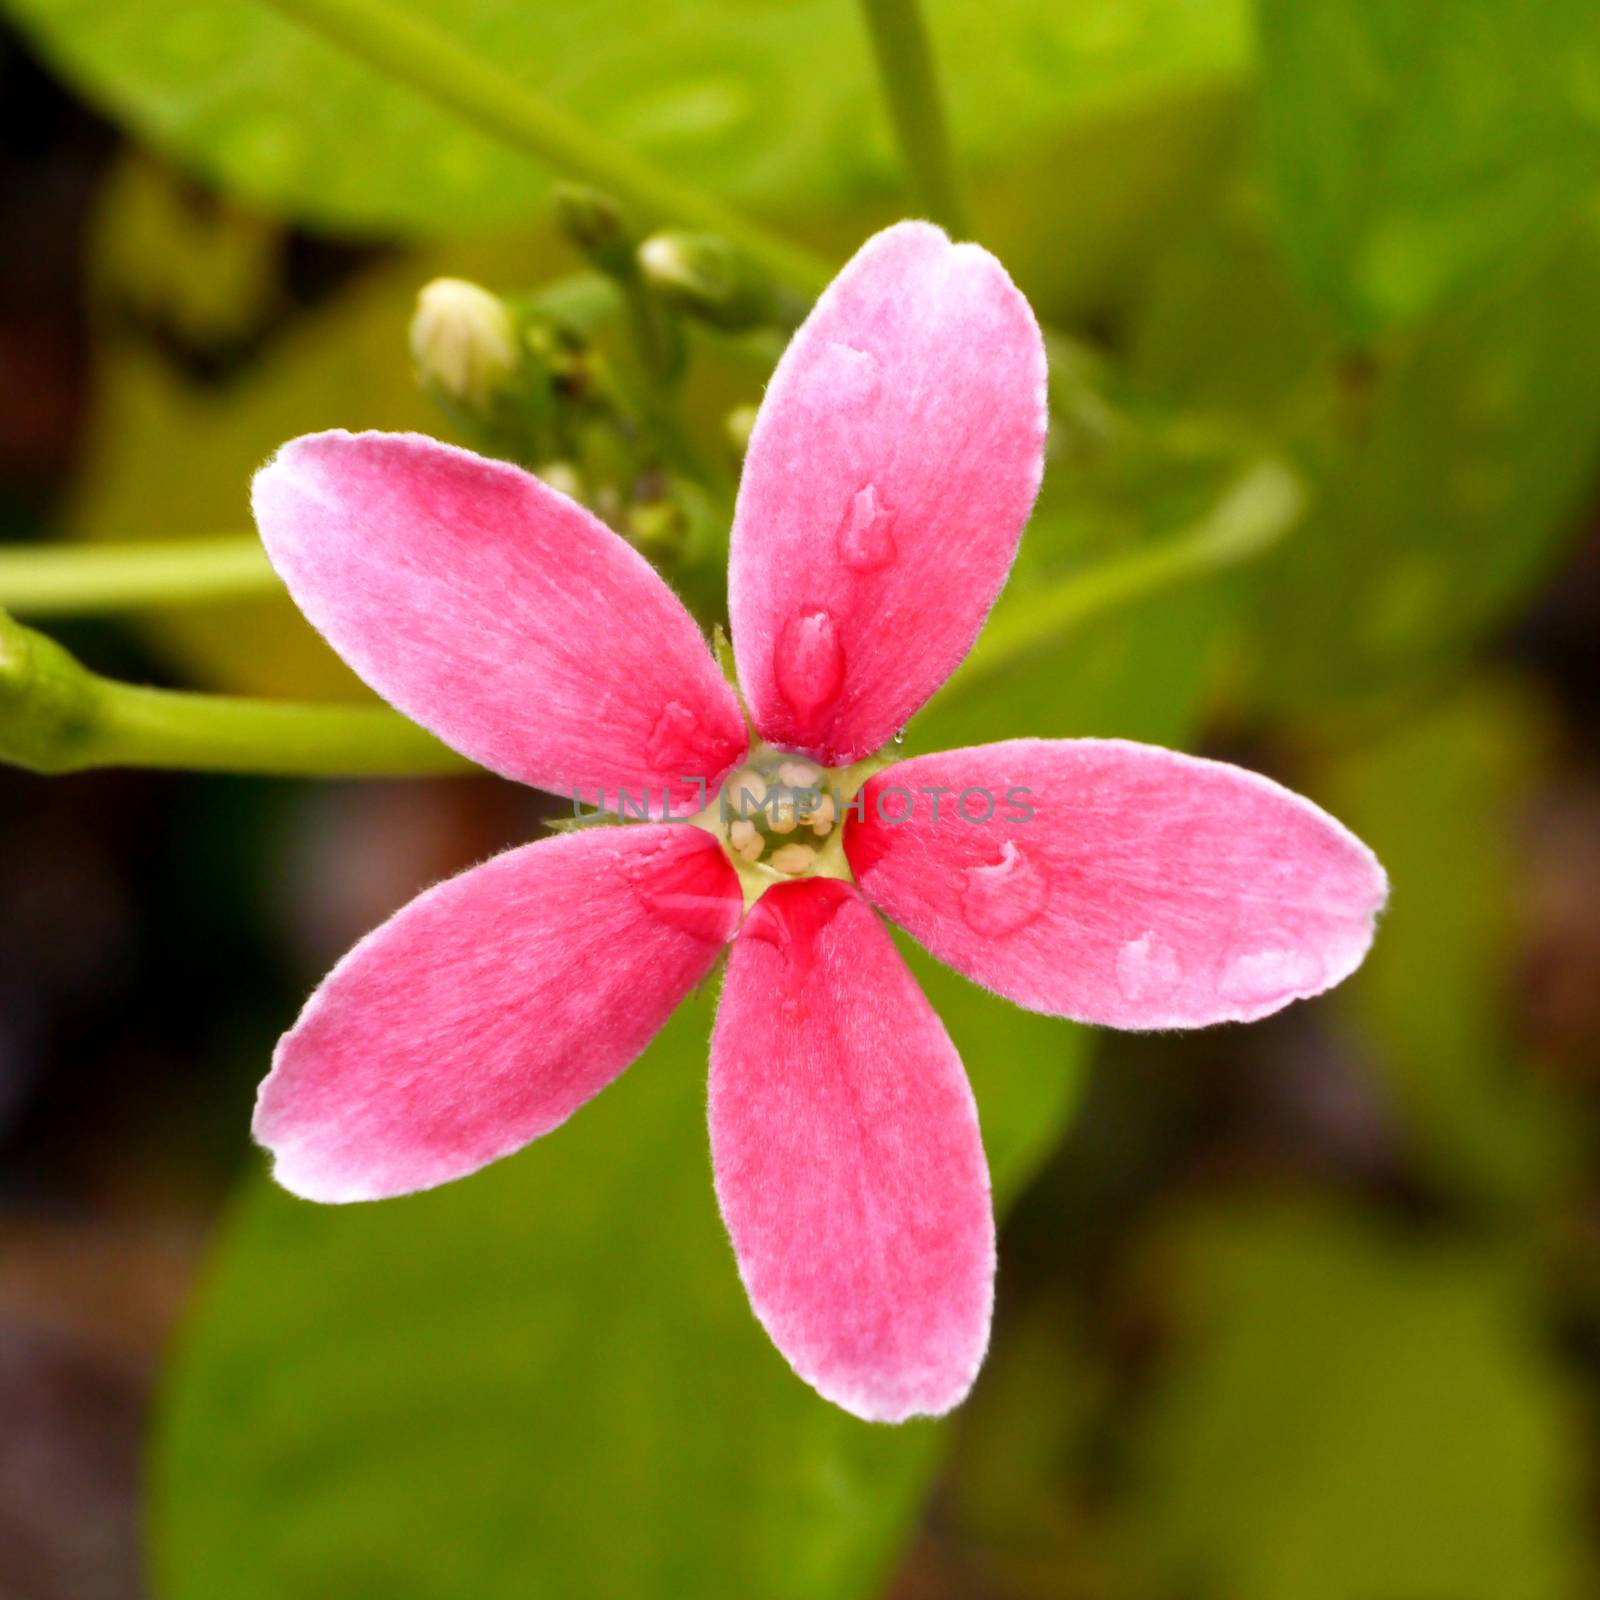 red and pink flower of Rangoon creeper. by Noppharat_th